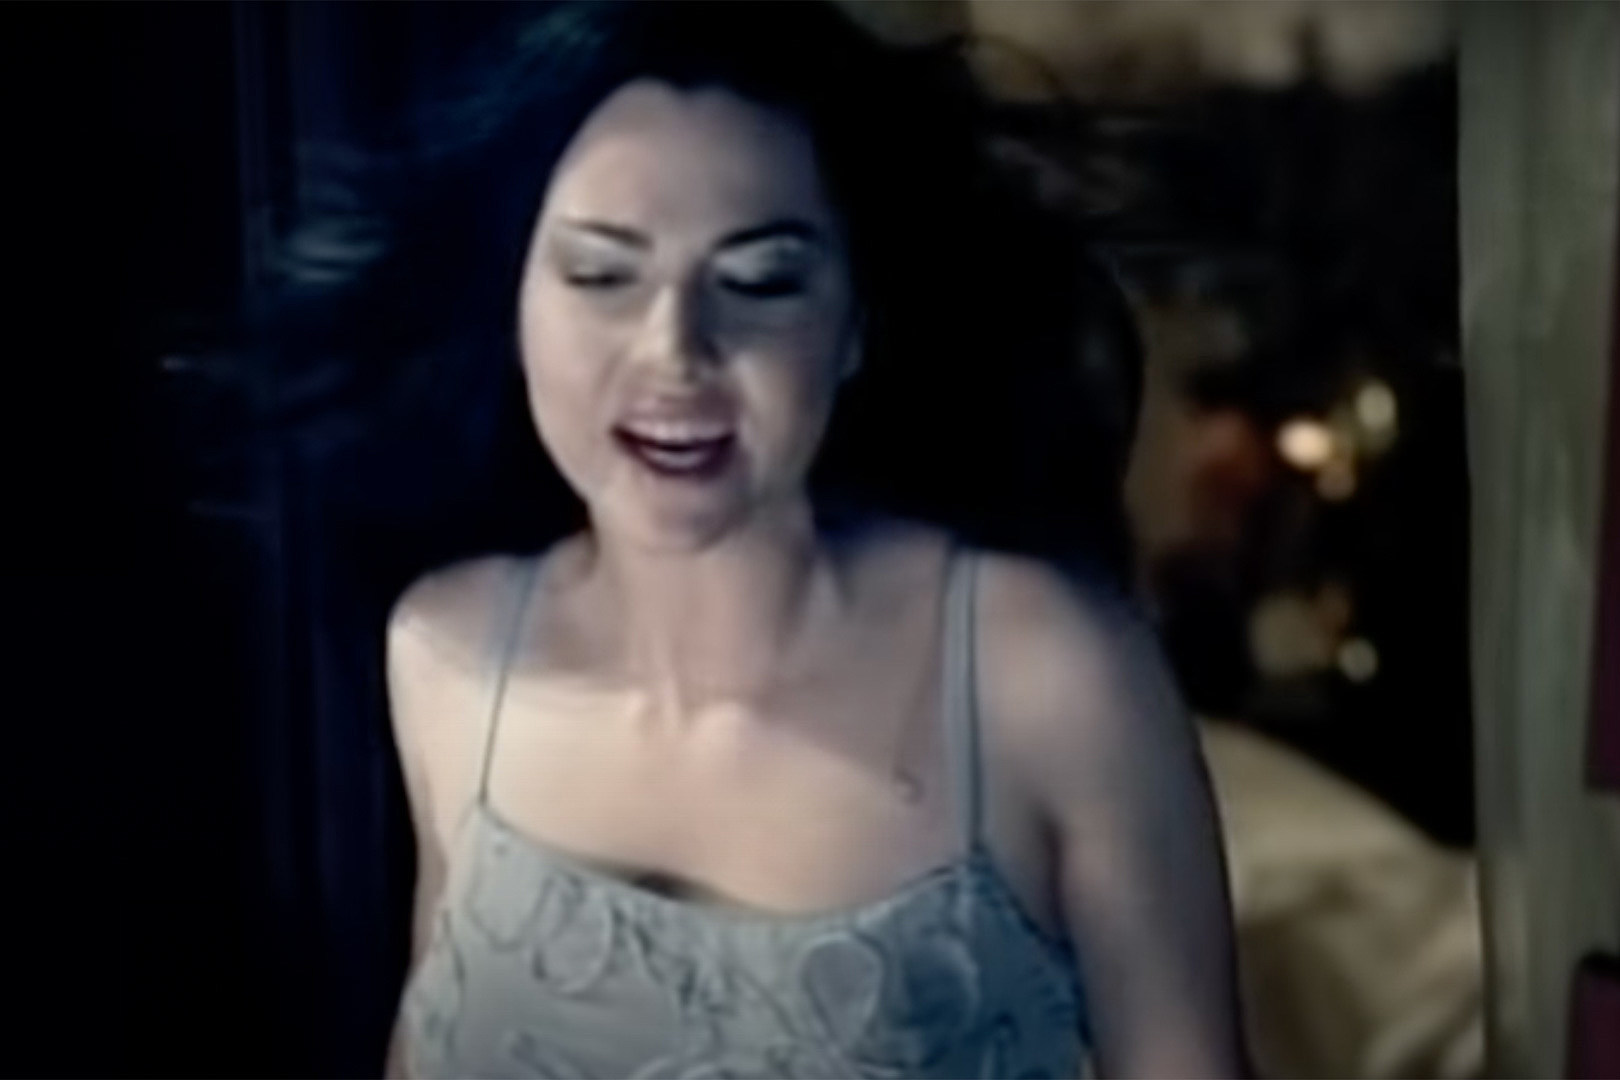 Amy Lee Fucking Girls - Evanescence's 'Bring Me to Life' Video Passes 1 Billion YouTube